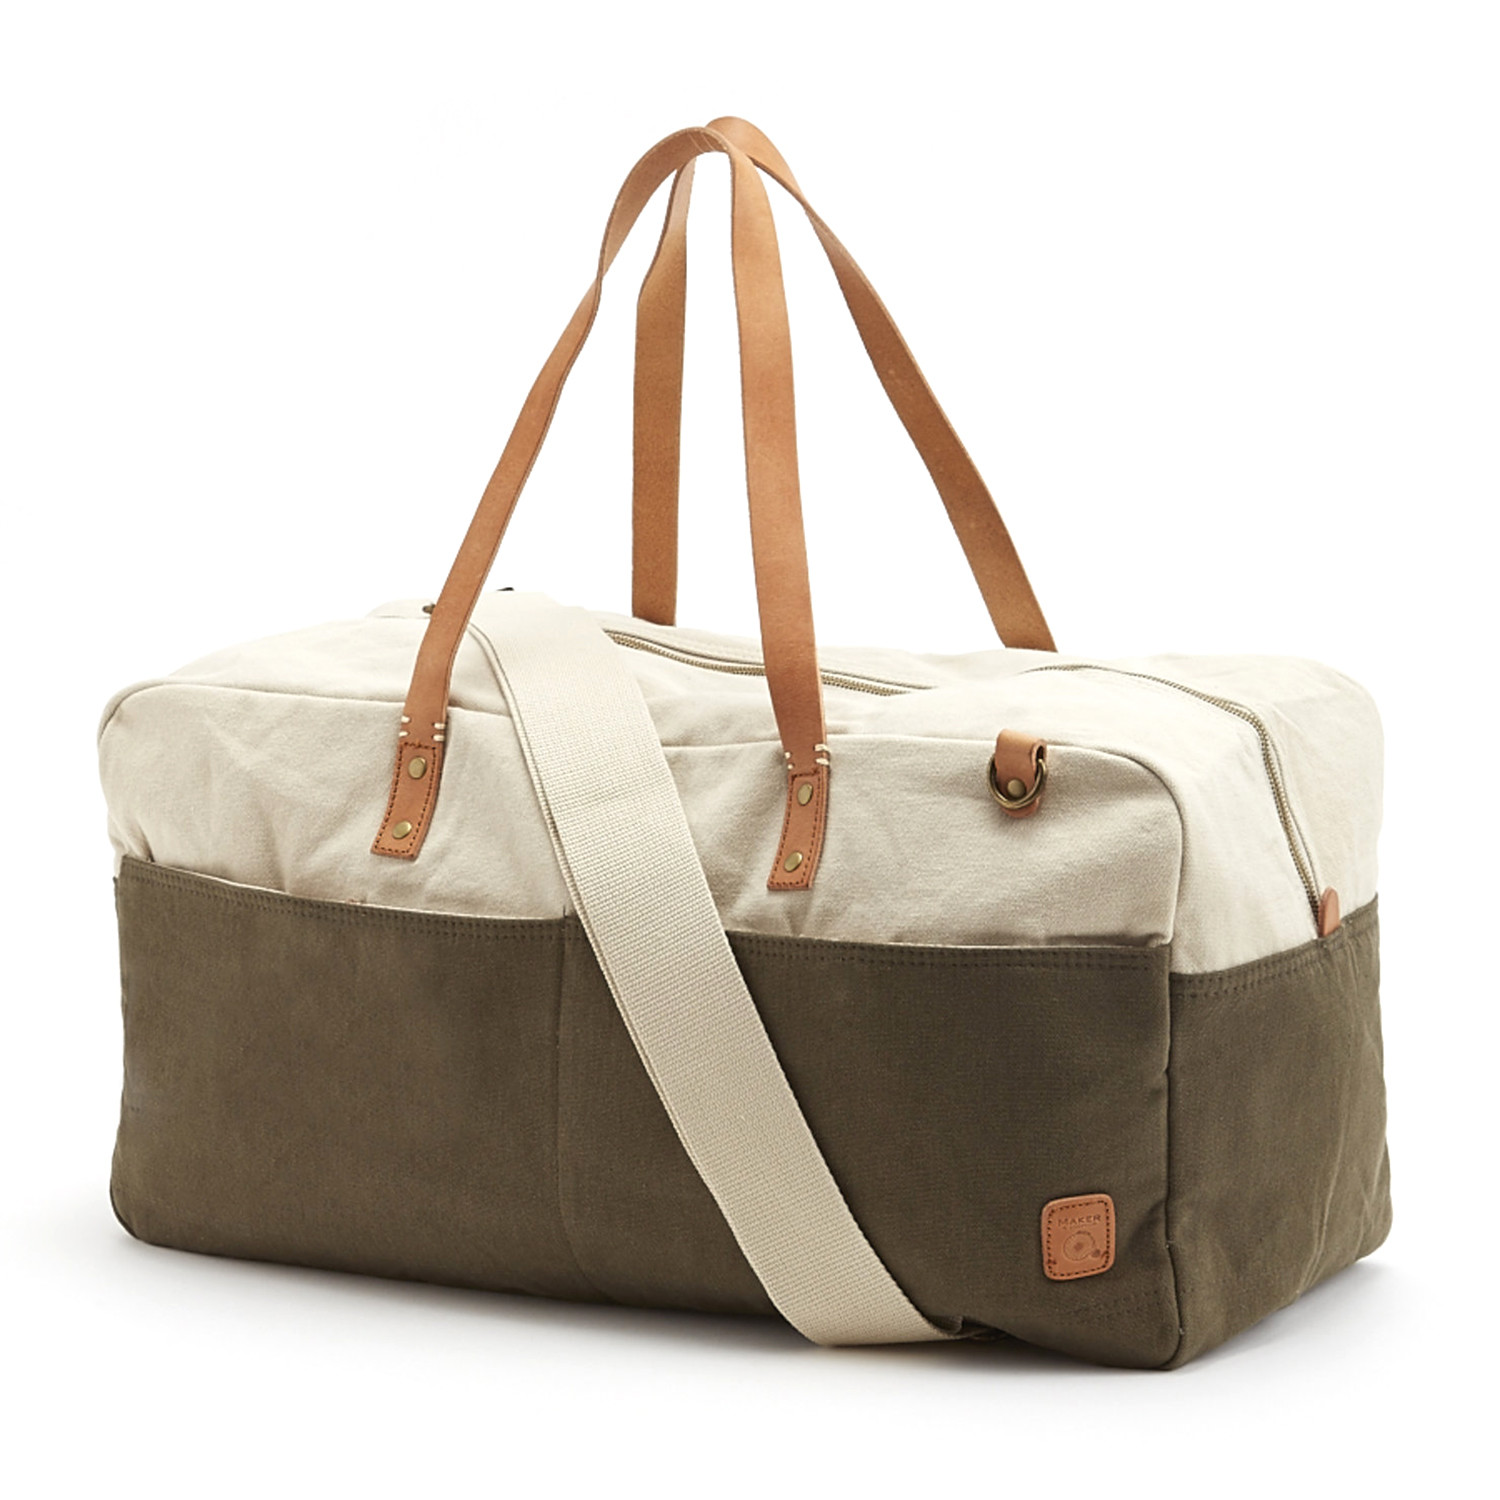 Two Tone Washed Canvas Shoulder Duffle Bag // Olive - Maker & Company ...